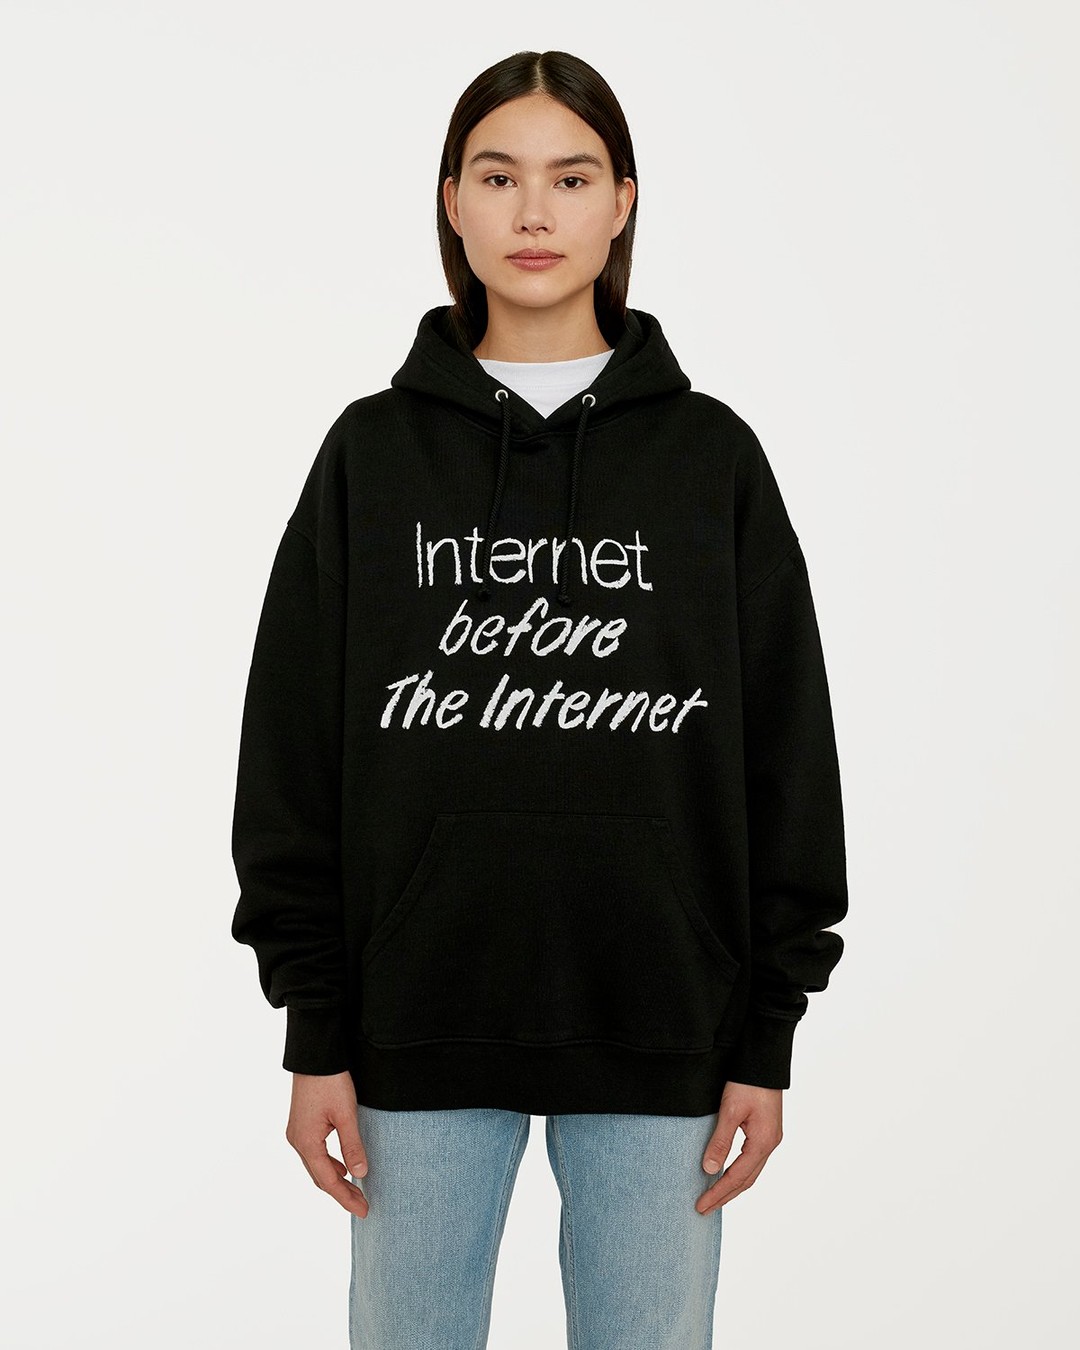 Colette Mon Amour – The Internet Before The Internet Hoodie Black - Hoodies - Black - Image 4